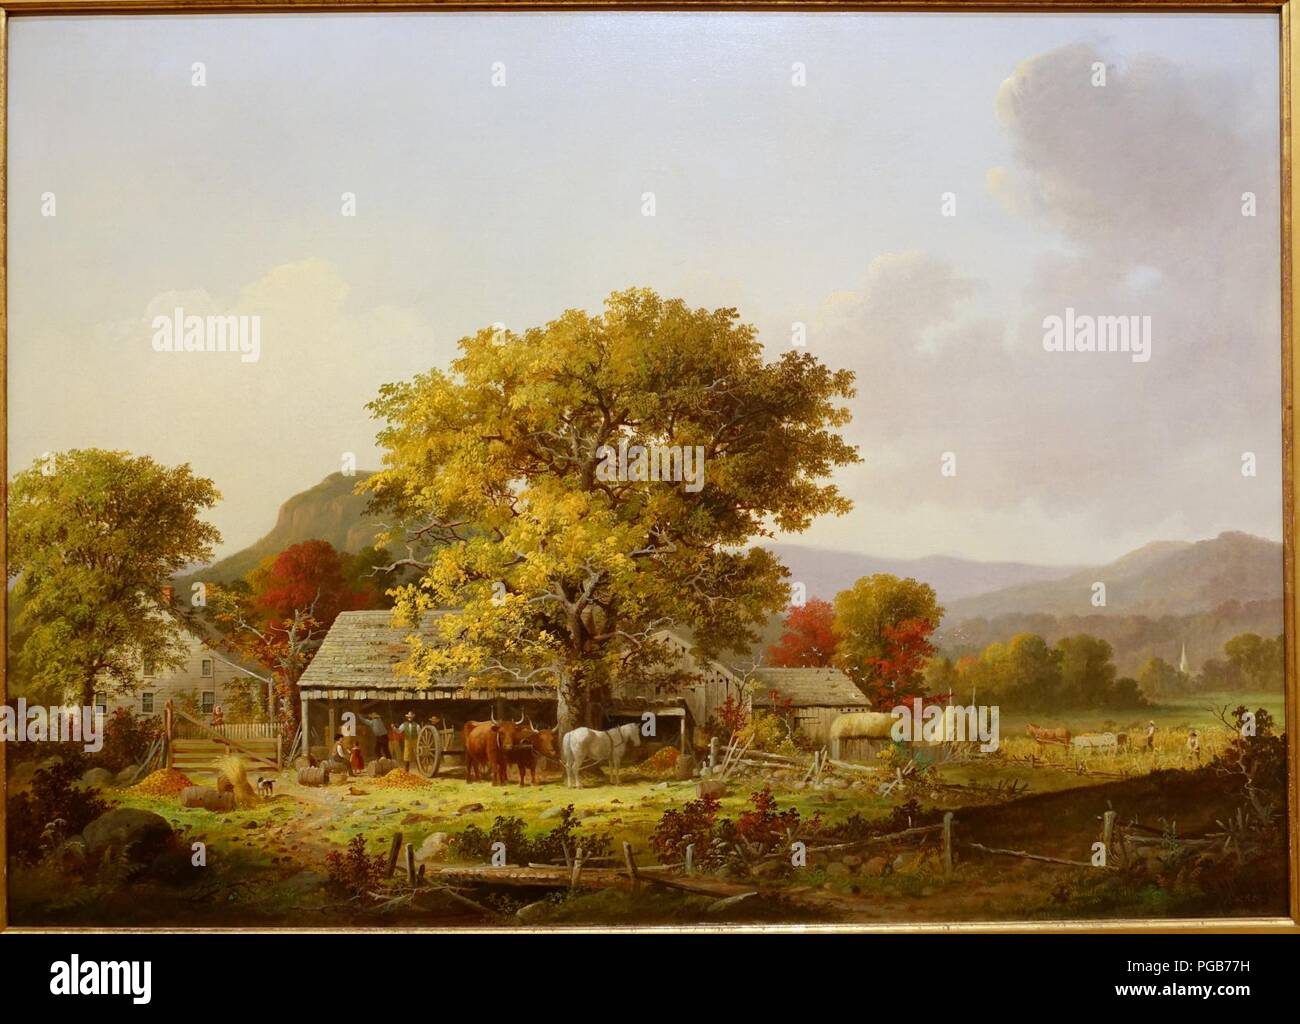 Autumn in New England, Cider Making, by George Henry Durrie, 1863 AD, oil on canvas - Museo Nacional Centro de Arte Reina Sofía - DSC08641. Stock Photo